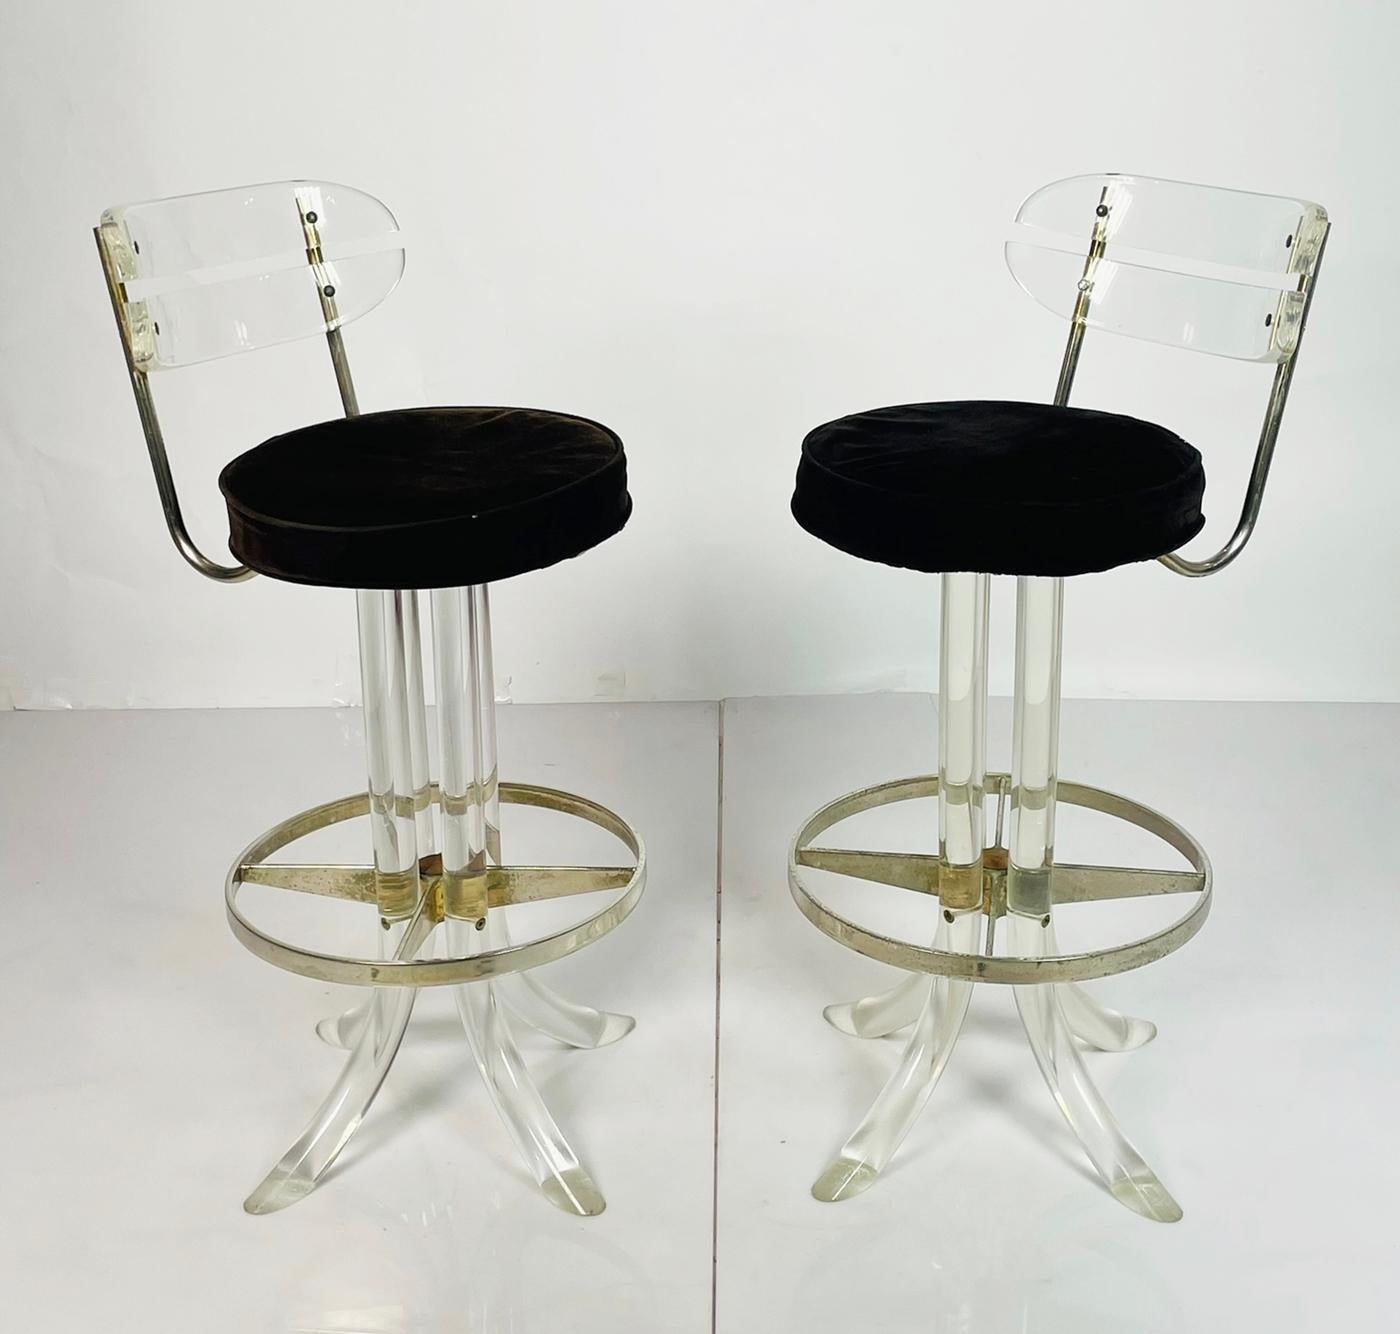 Introducing the Pair of Lucite & Chrome Barstools After Charles Hollis Jones, USA 1970', a stunning addition to any modern home. These barstools are a tribute to the iconic designer Charles Hollis Jones, renowned for his innovative use of materials